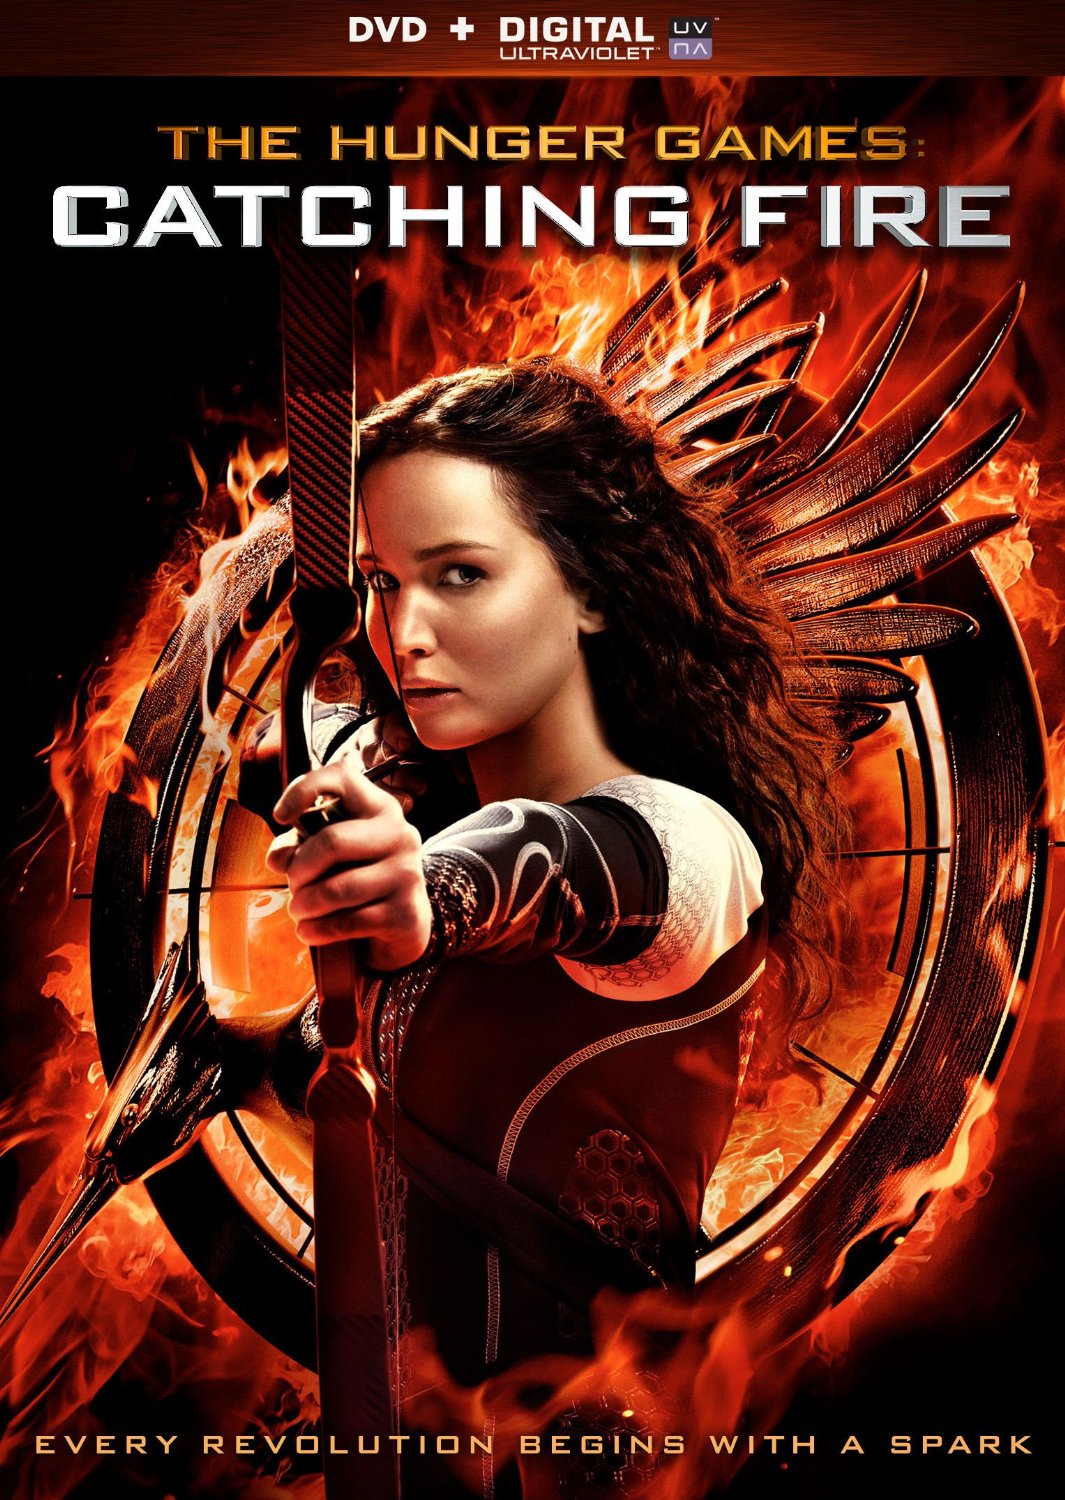 The Hunger Games: Catching Fire #1